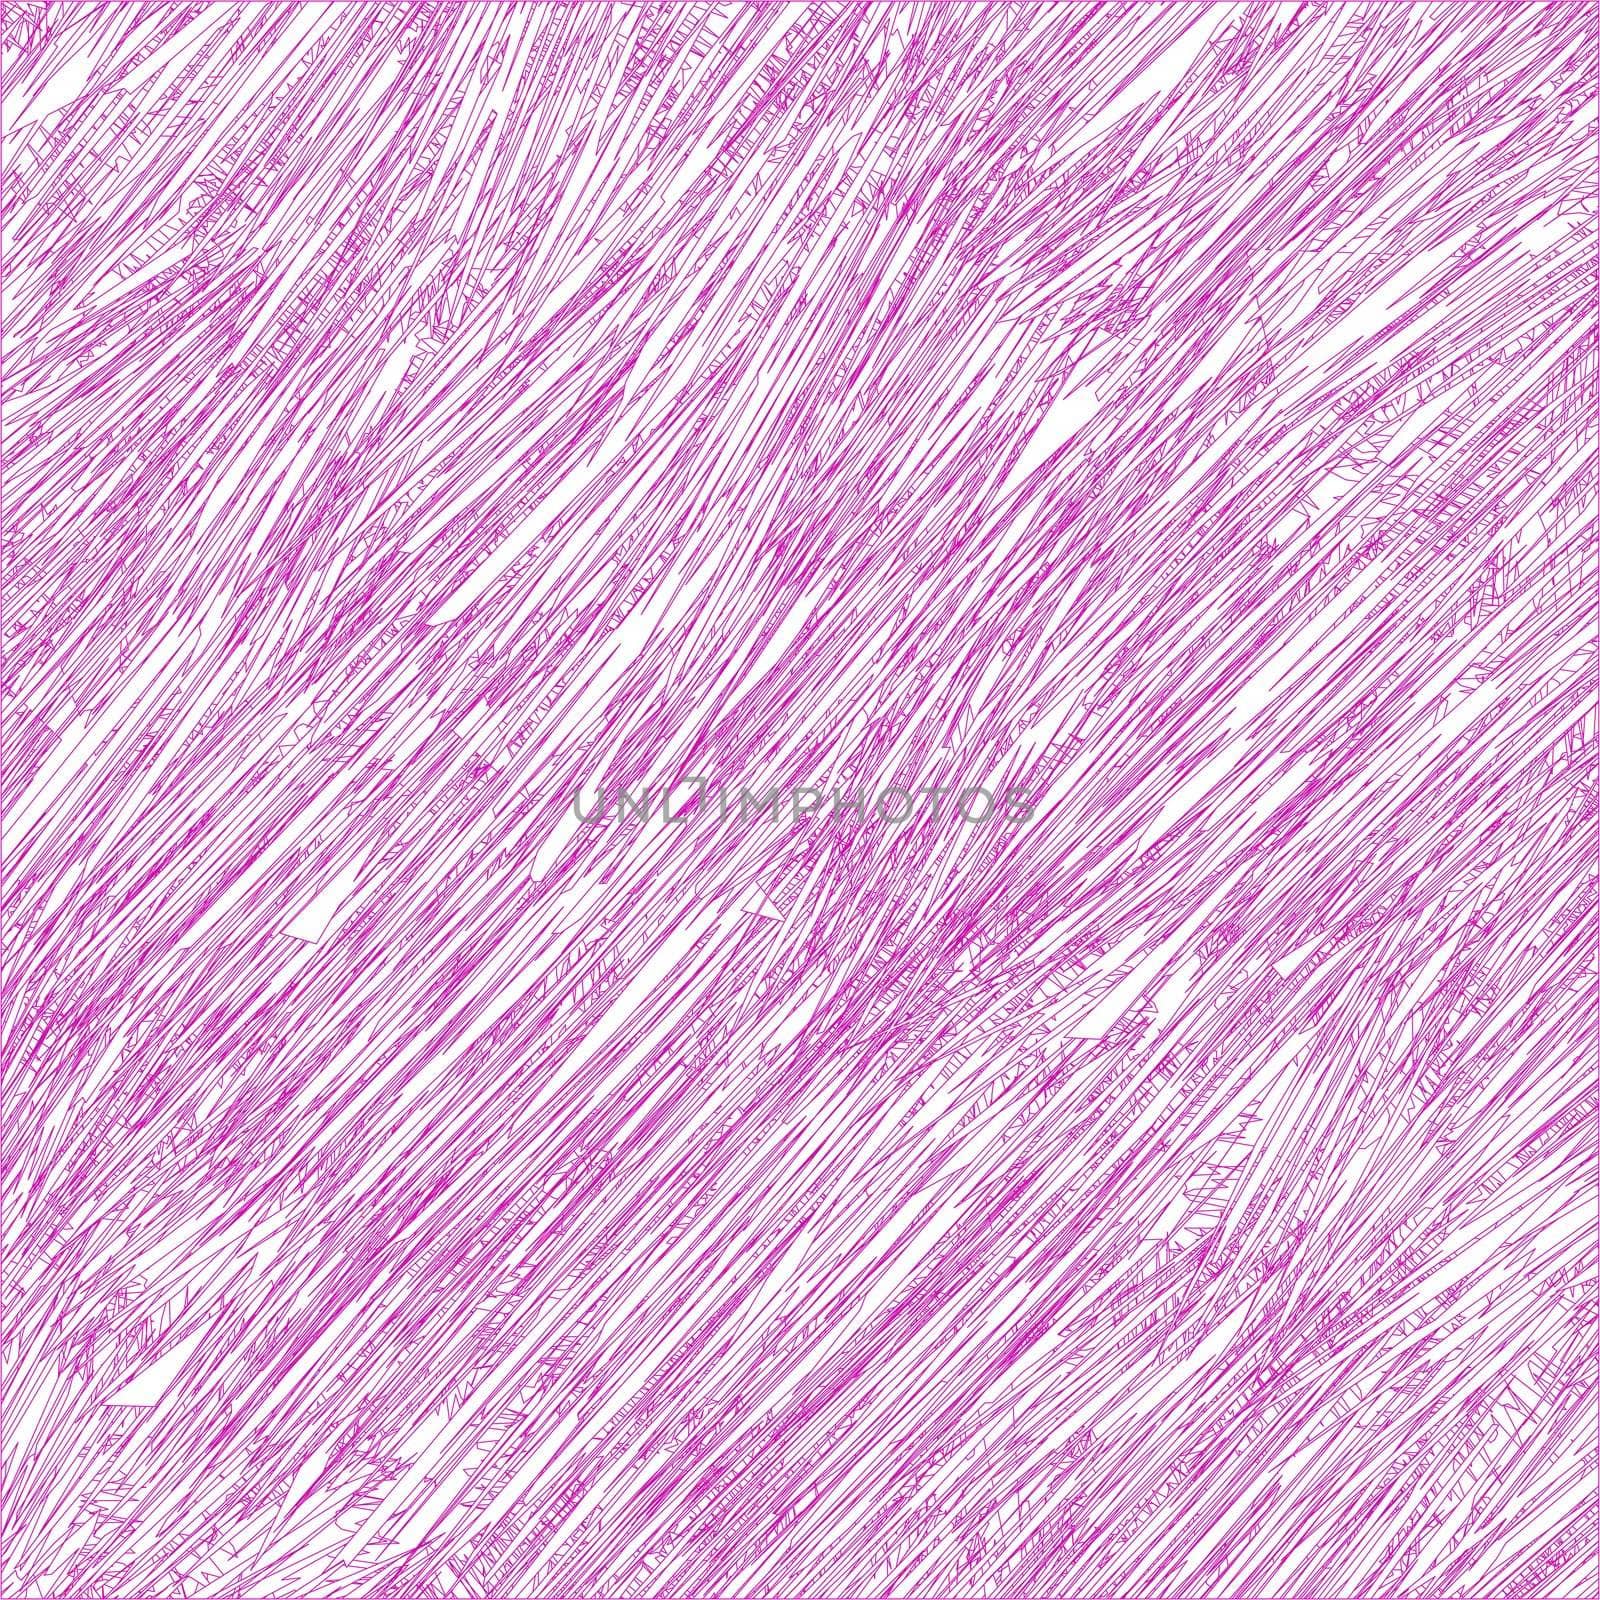 white and purple stripes, abstract art illustration